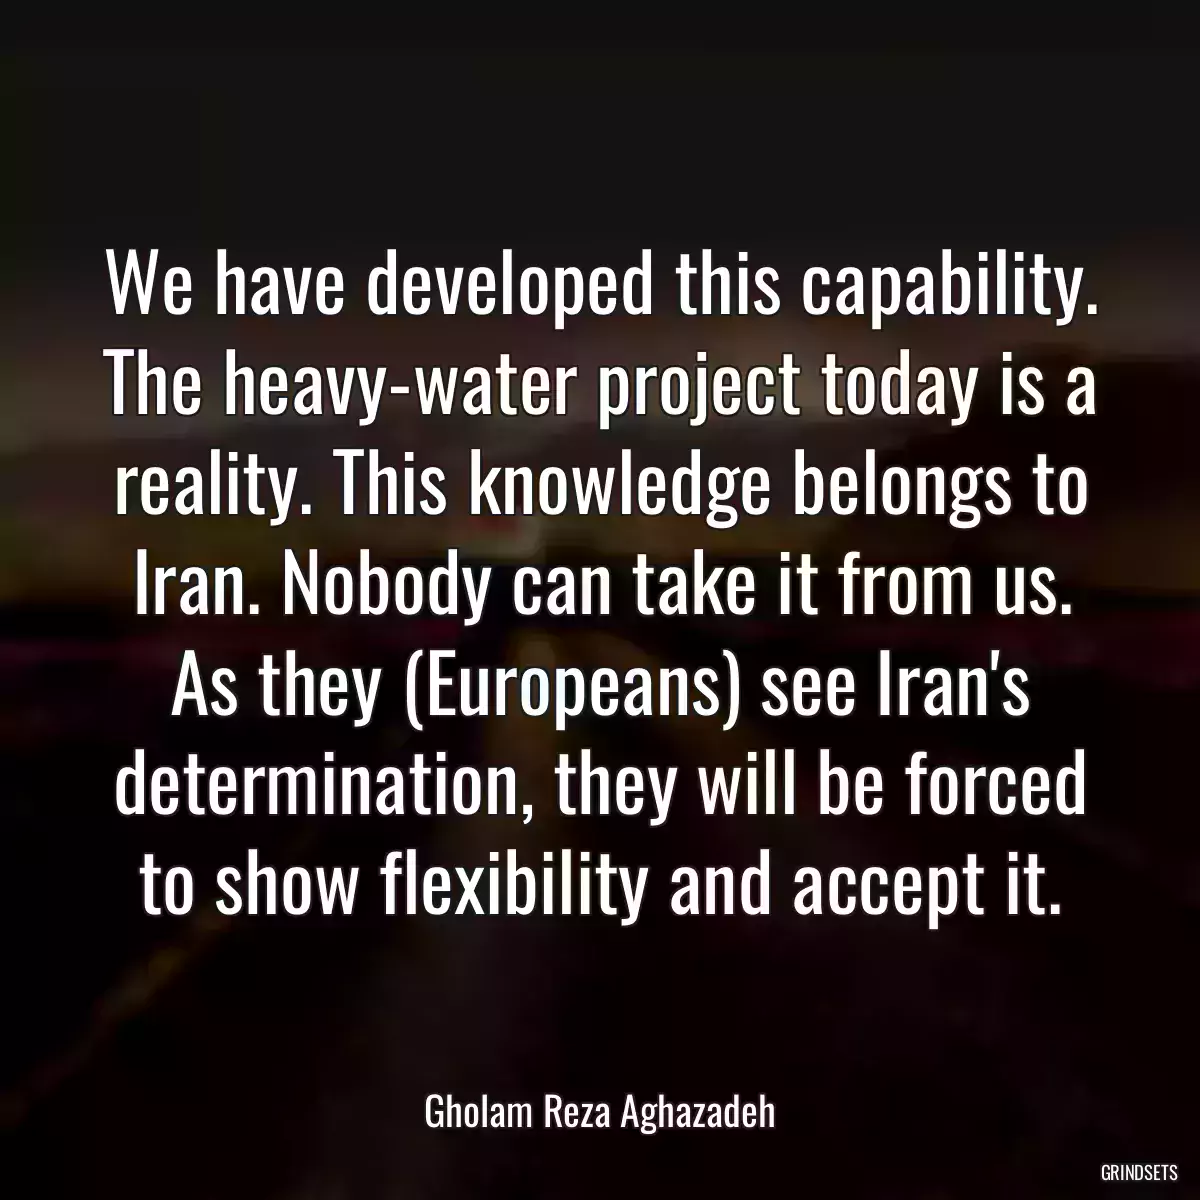 We have developed this capability. The heavy-water project today is a reality. This knowledge belongs to Iran. Nobody can take it from us. As they (Europeans) see Iran\'s determination, they will be forced to show flexibility and accept it.